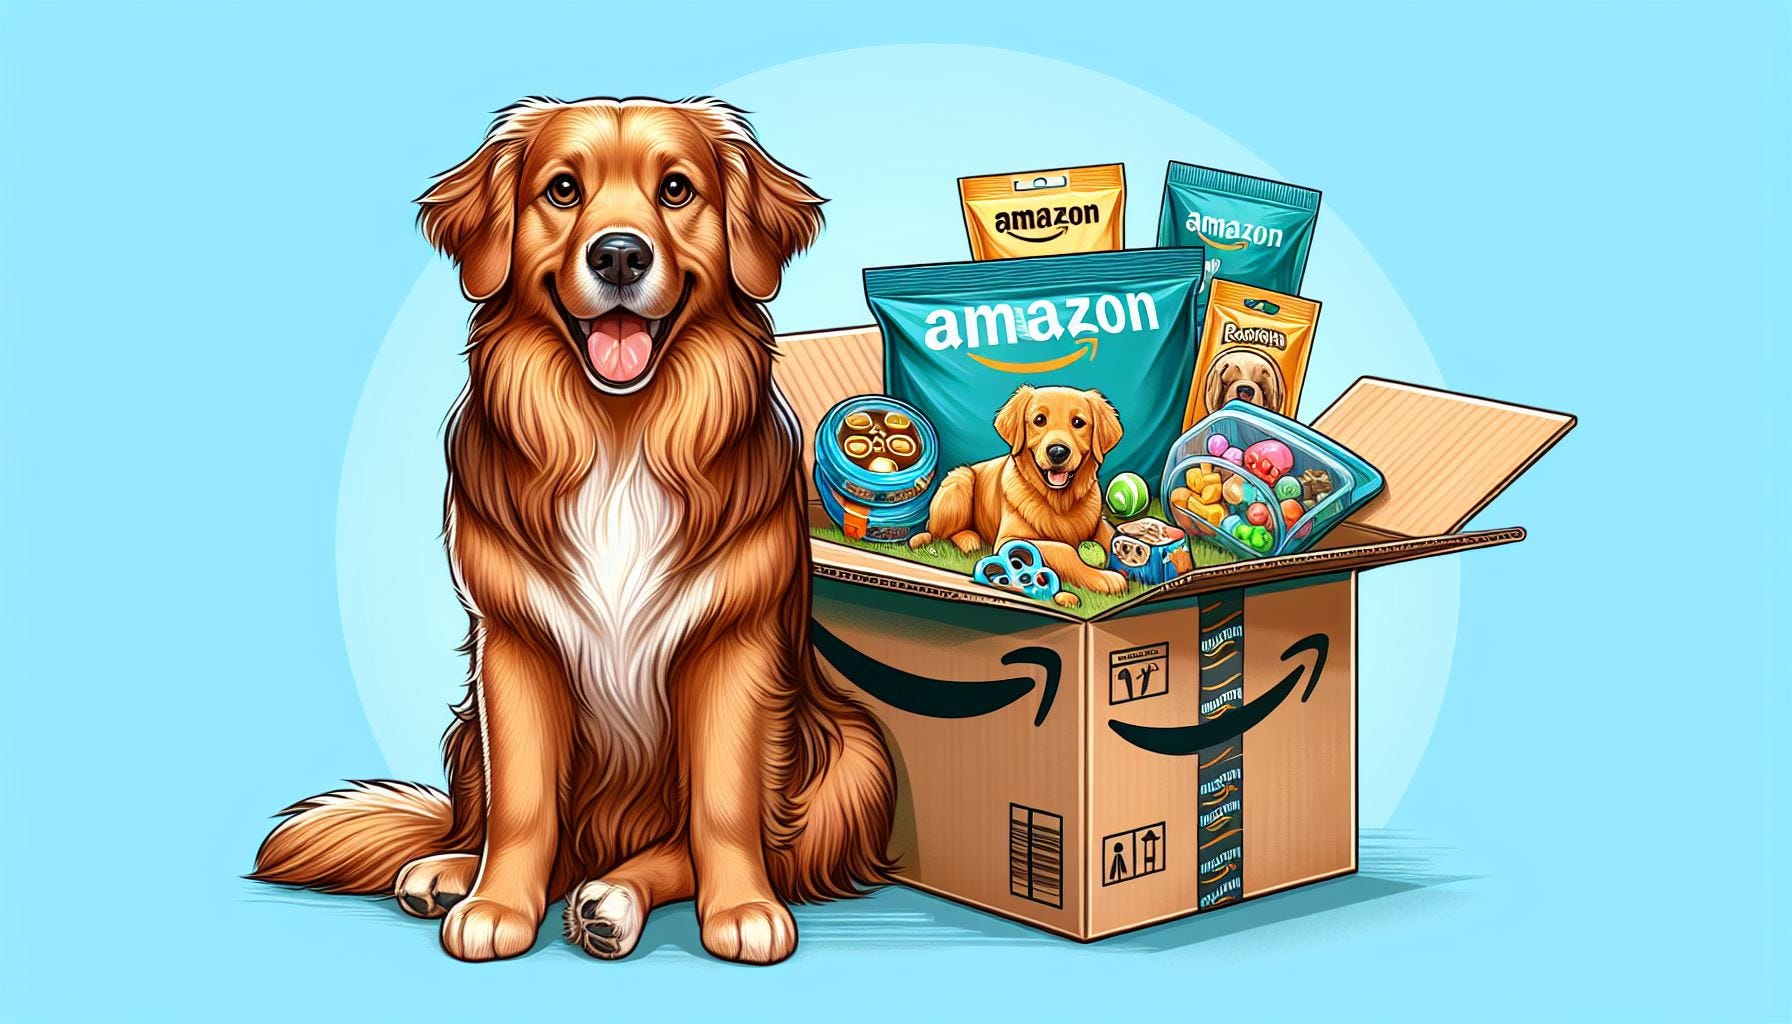 Amazon Pet Influencer: How to Make Your Pet a Social Media Star